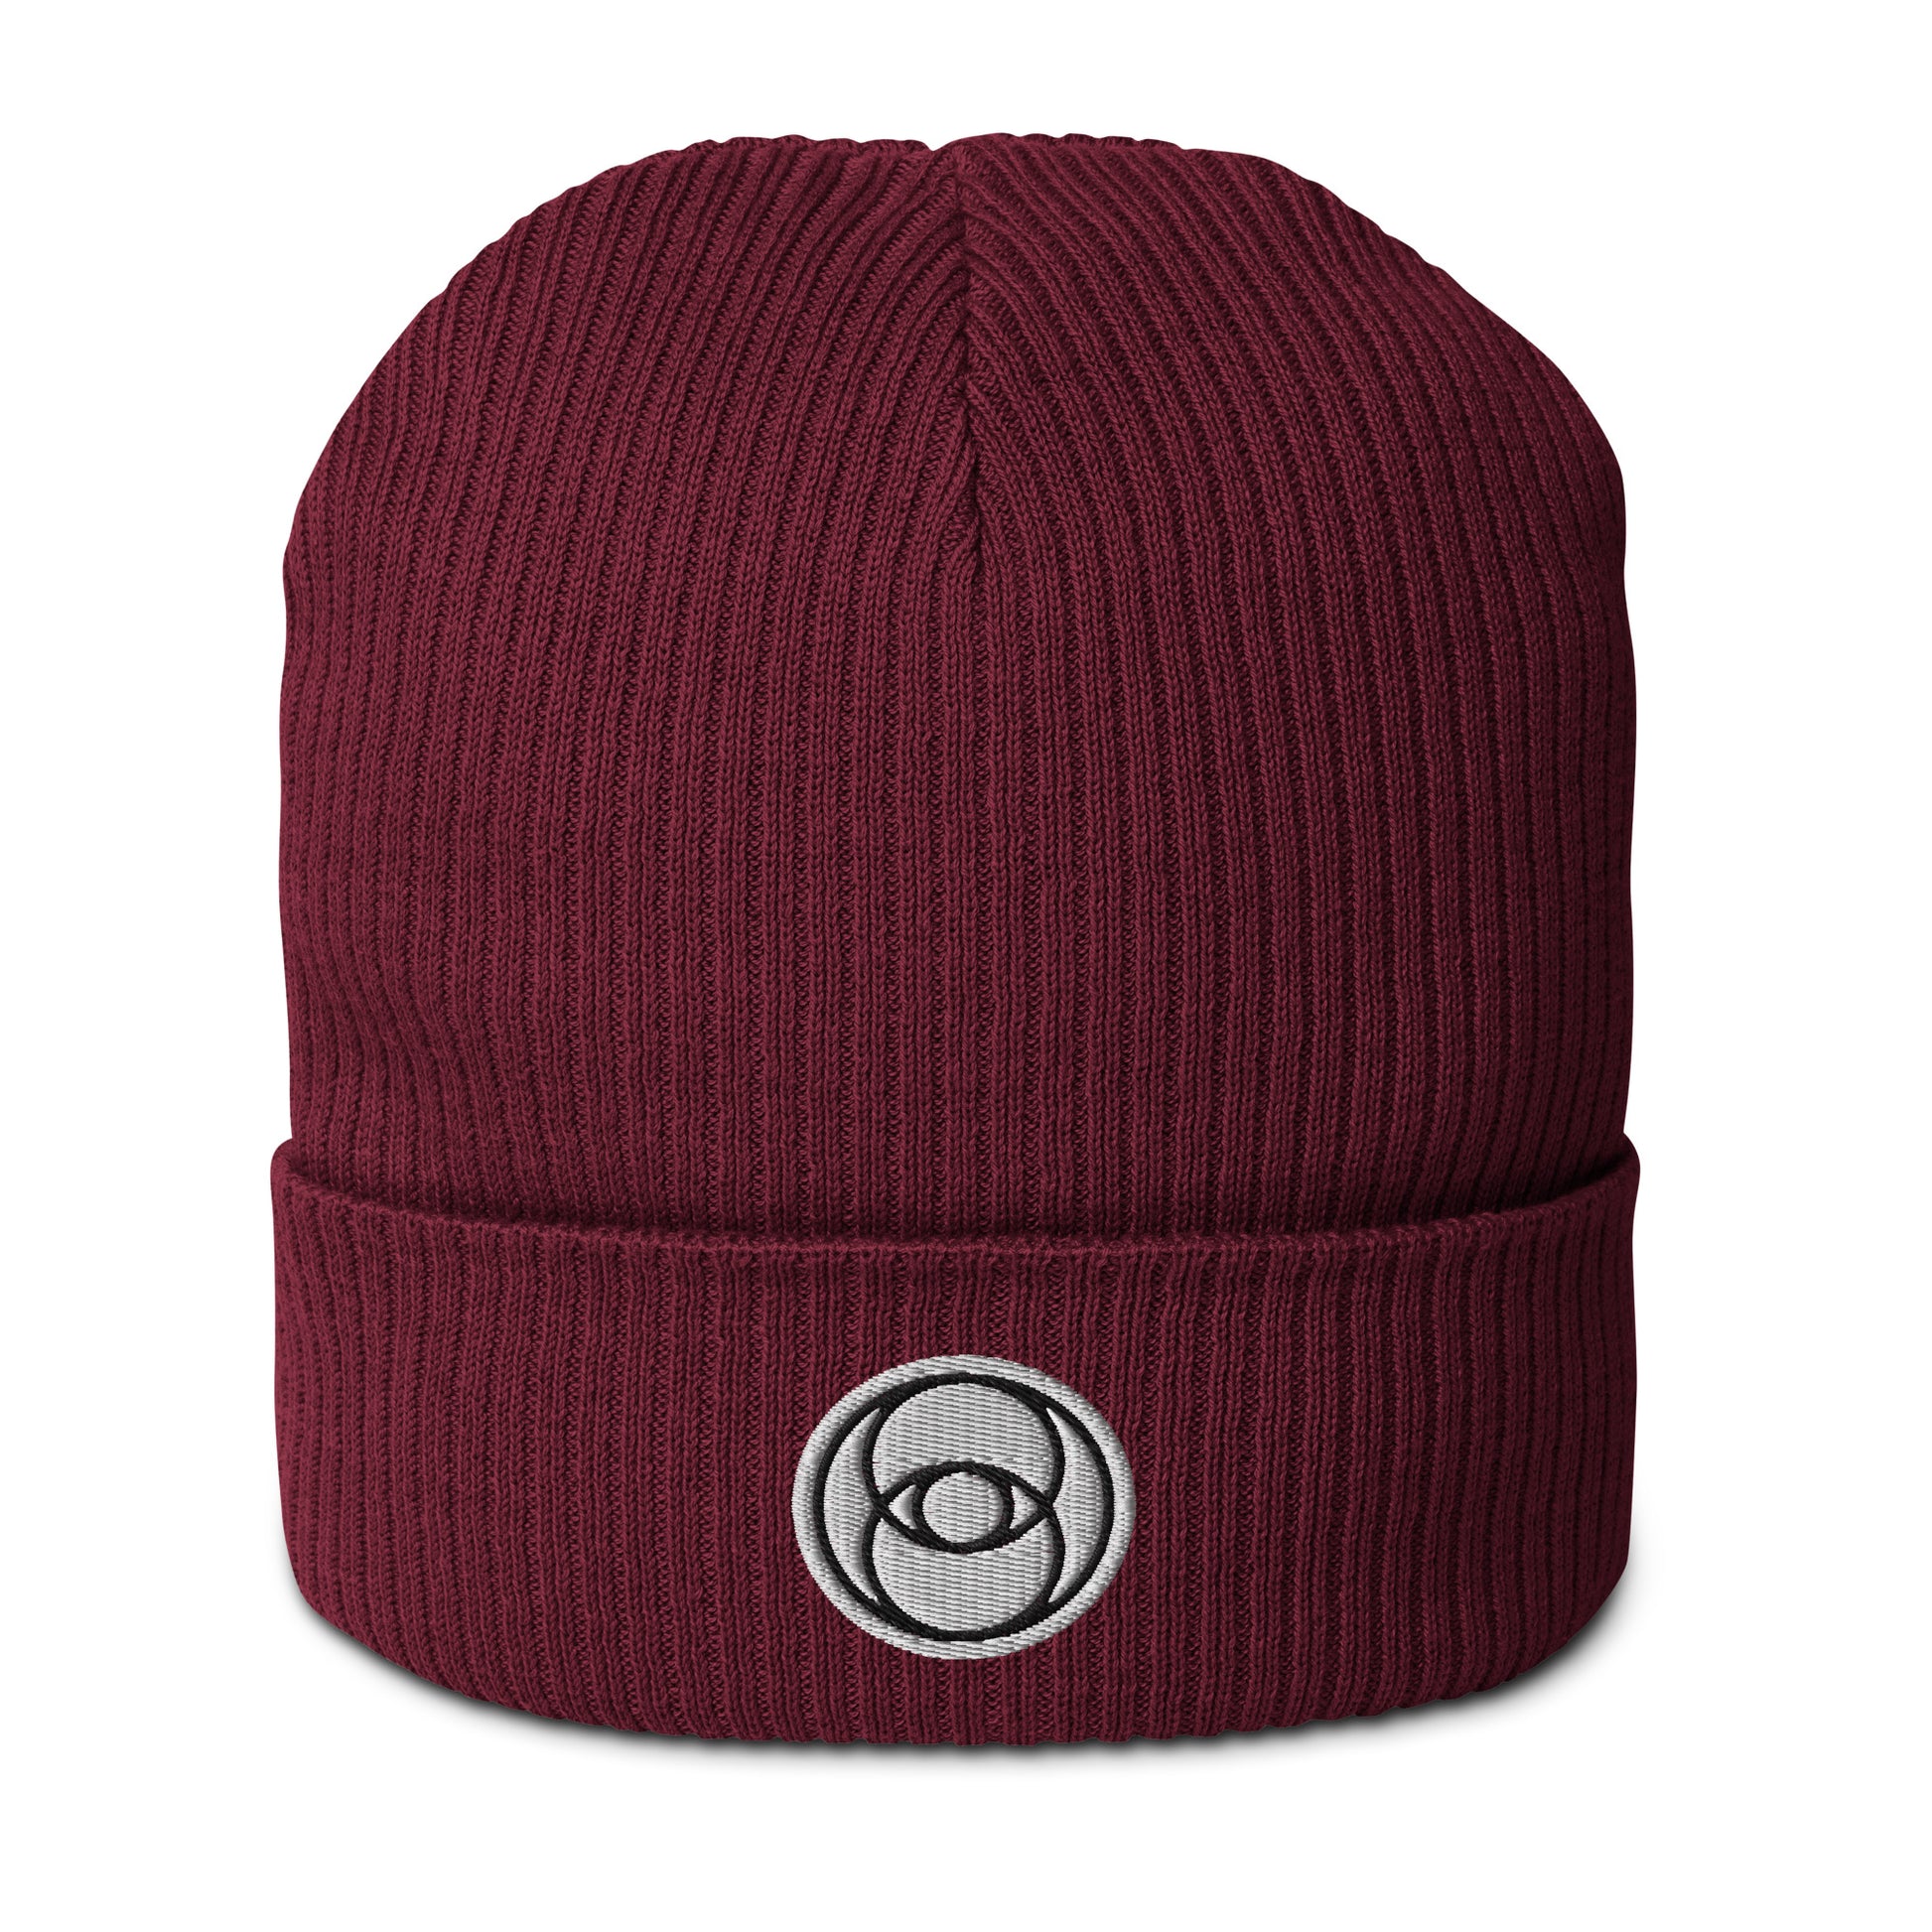 The Vesica Piscis Organic Cotton Beanie in Wine Red is all about harmonious unions. Made of organic cotton and featuring a Vesica Piscis embroidery, this piece is something special. The Vesica Piscis symbolizes unity, balance, and connecting with the universe. Our beanies are made with breathable, lightweight fabric and natural materials, so you can stay comfy while you're exploring the mysteries of existence. Grab one of these beanies and add a touch of divinity to your style.